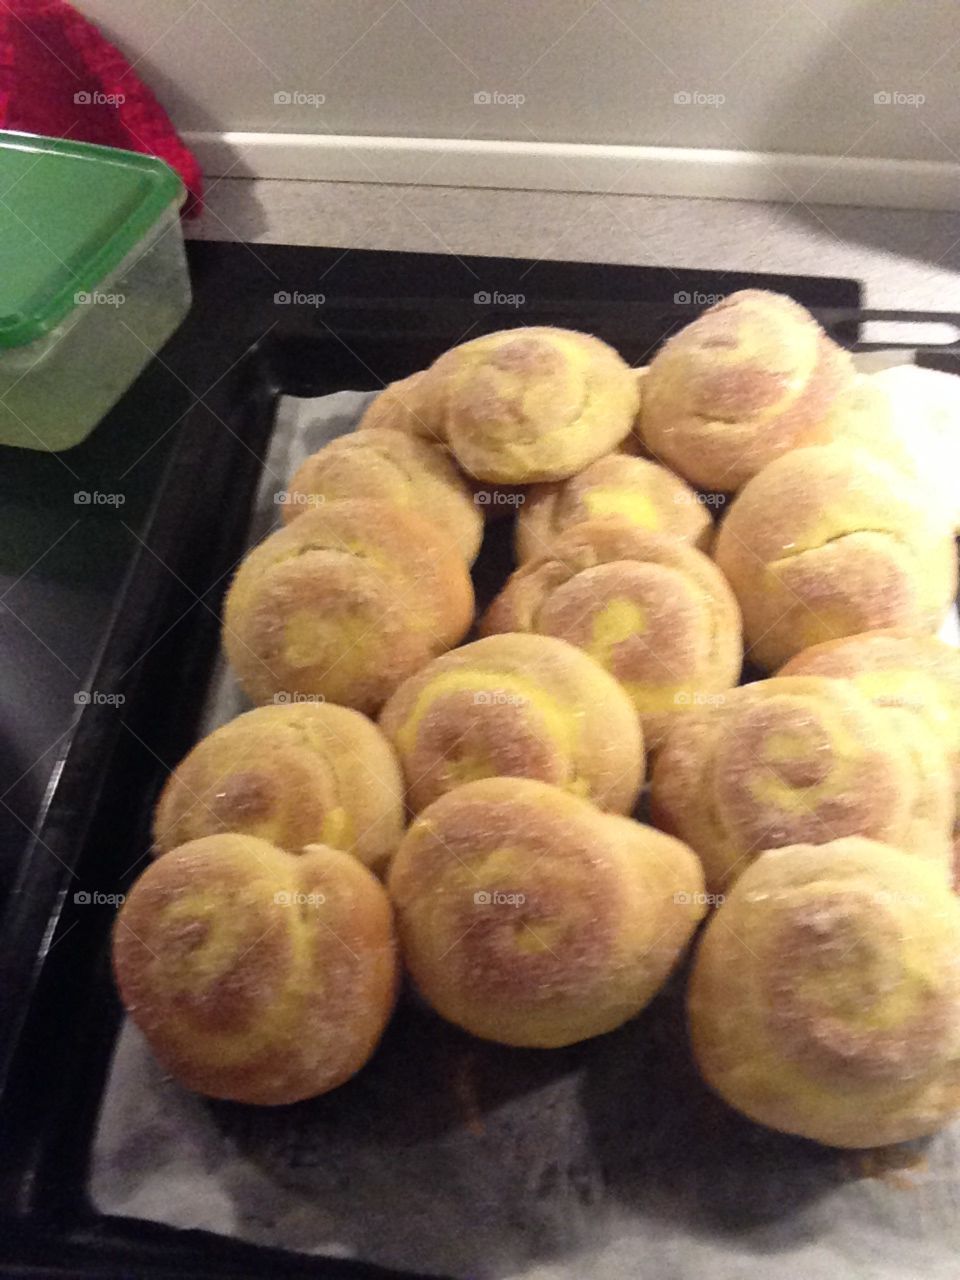 My busy kind friday baking Sweet buns with margarine and sugar on top, very soft and good for the coffe and tea.